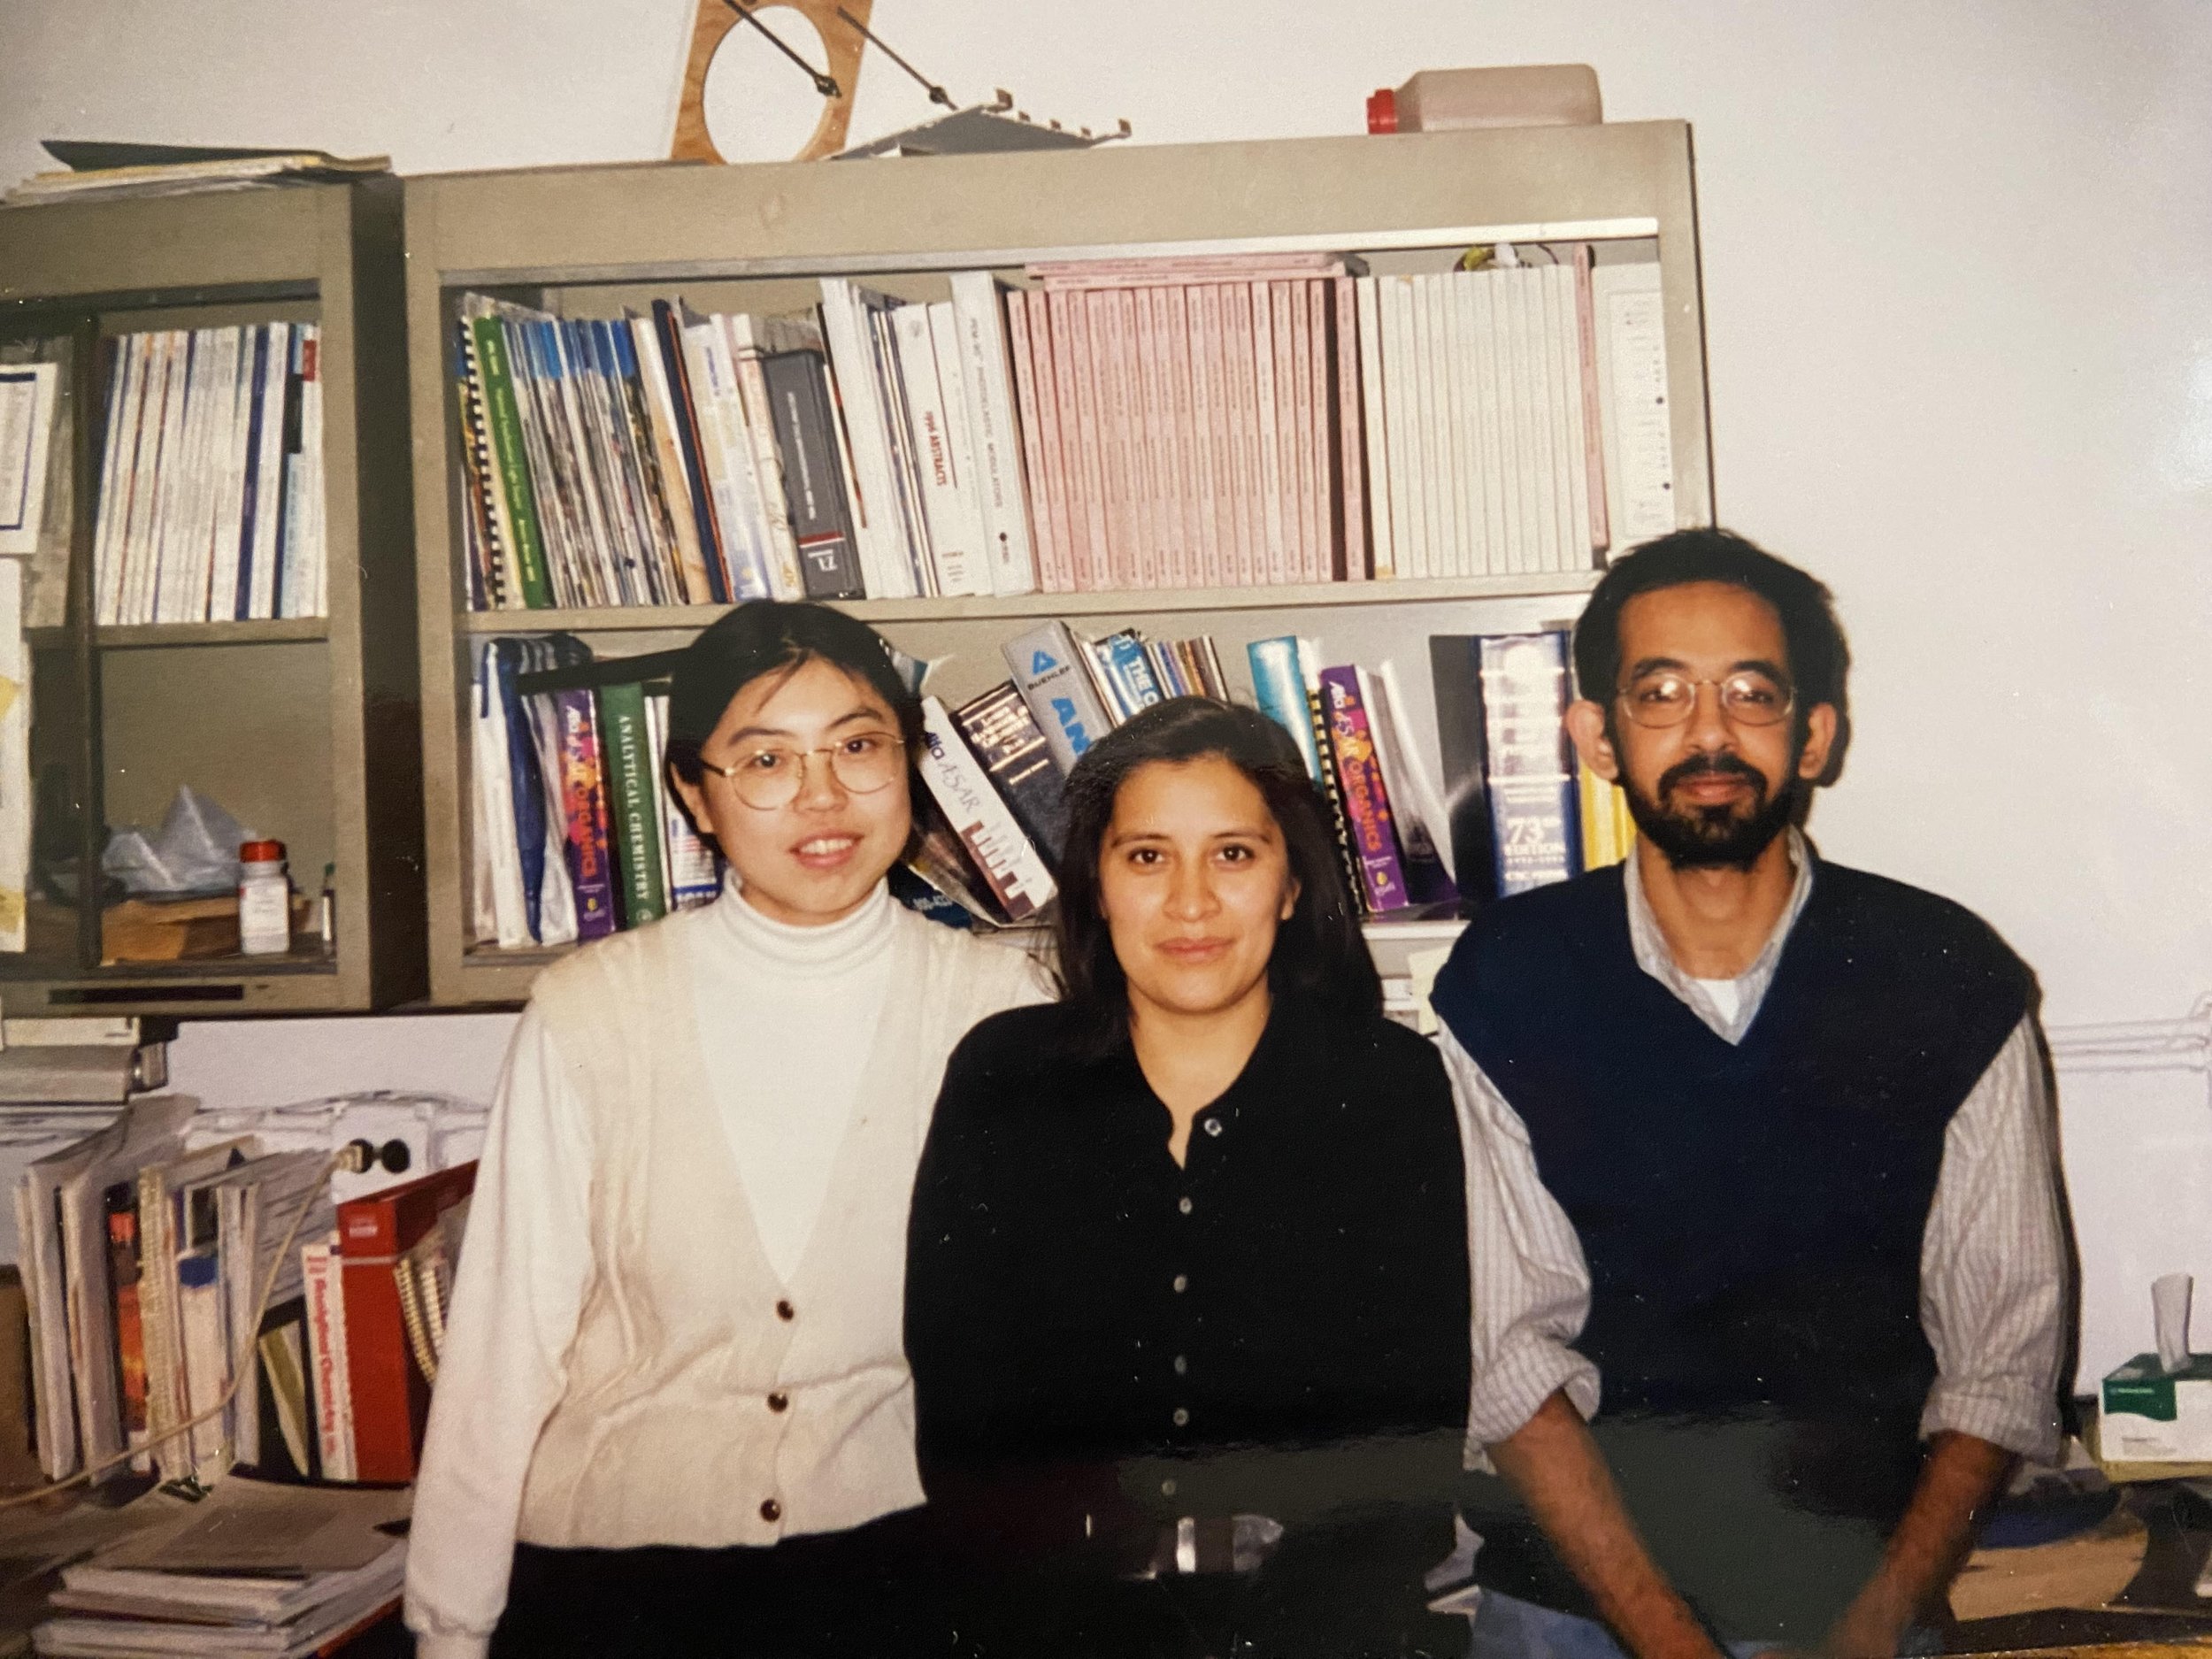  Bhaskar with his co-workers and lab mates during the time of the story. Photo courtesy of Bhaskar Sompalli.  